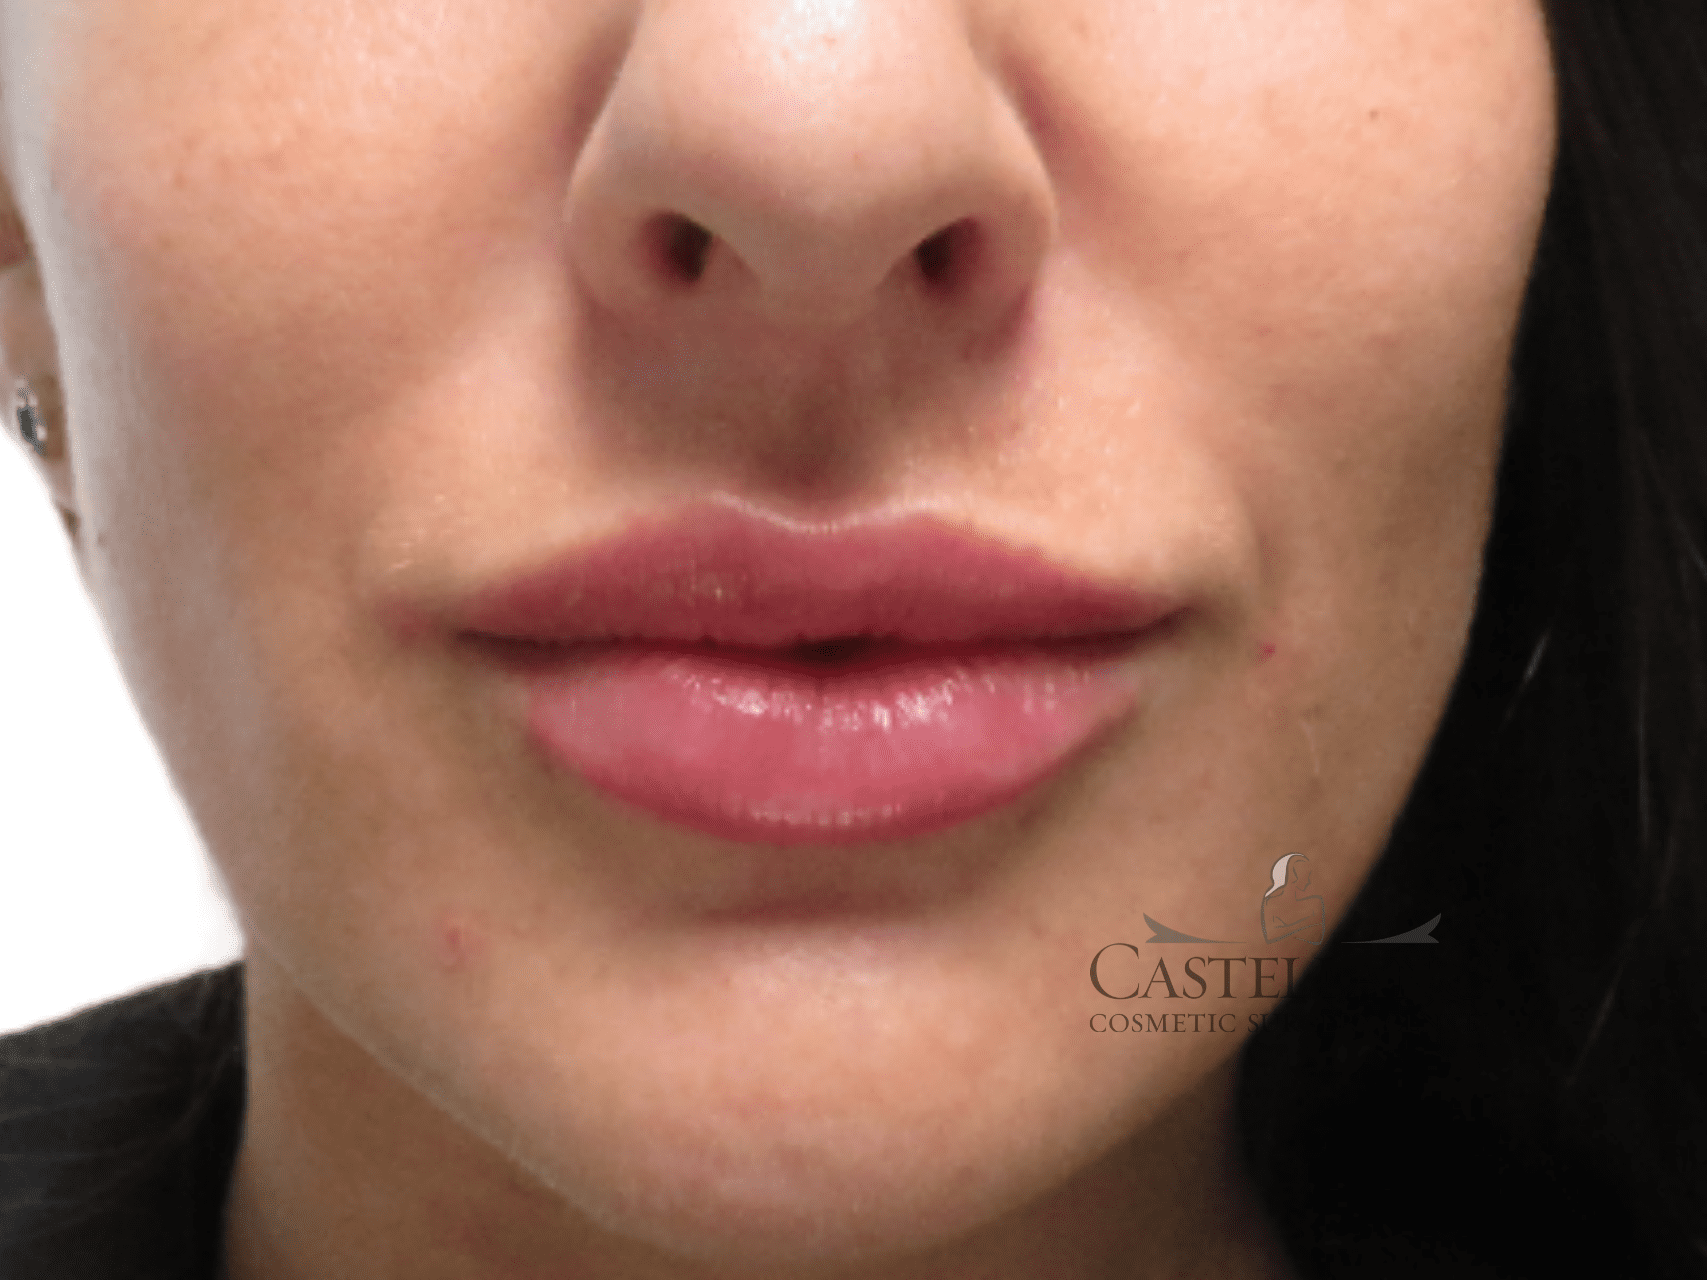 Injectable Fillers Patient Photo - Case 16329 - after view